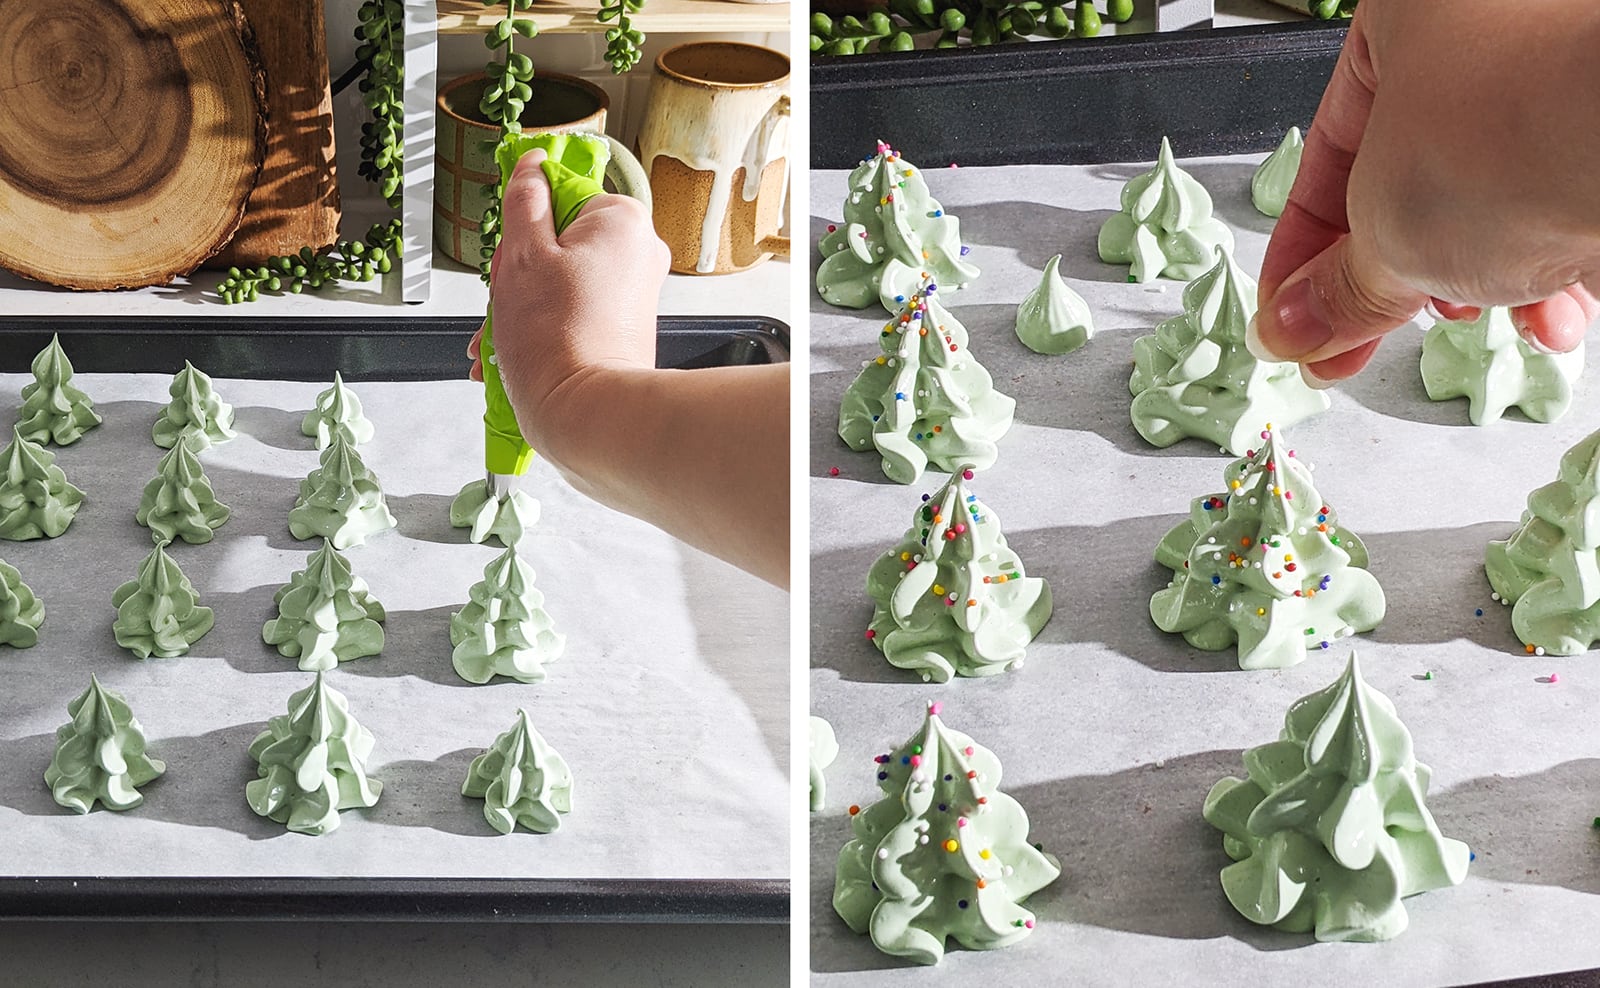 Piping meringues on baking sheet shaped like christmas trees and adding sprinkles.